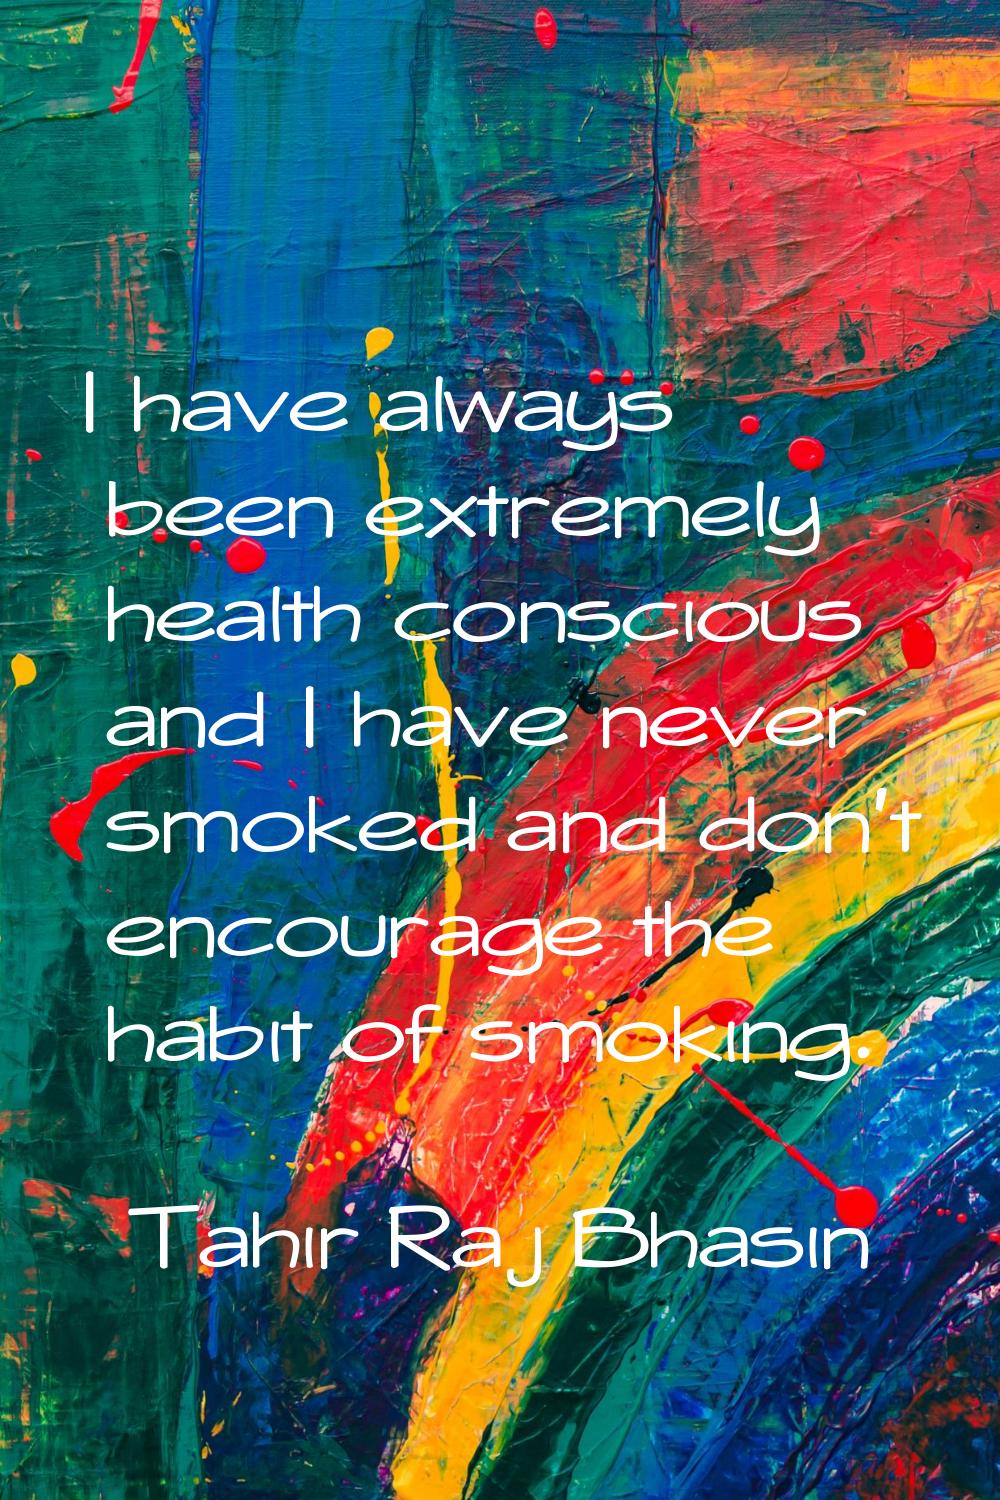 I have always been extremely health conscious and I have never smoked and don't encourage the habit